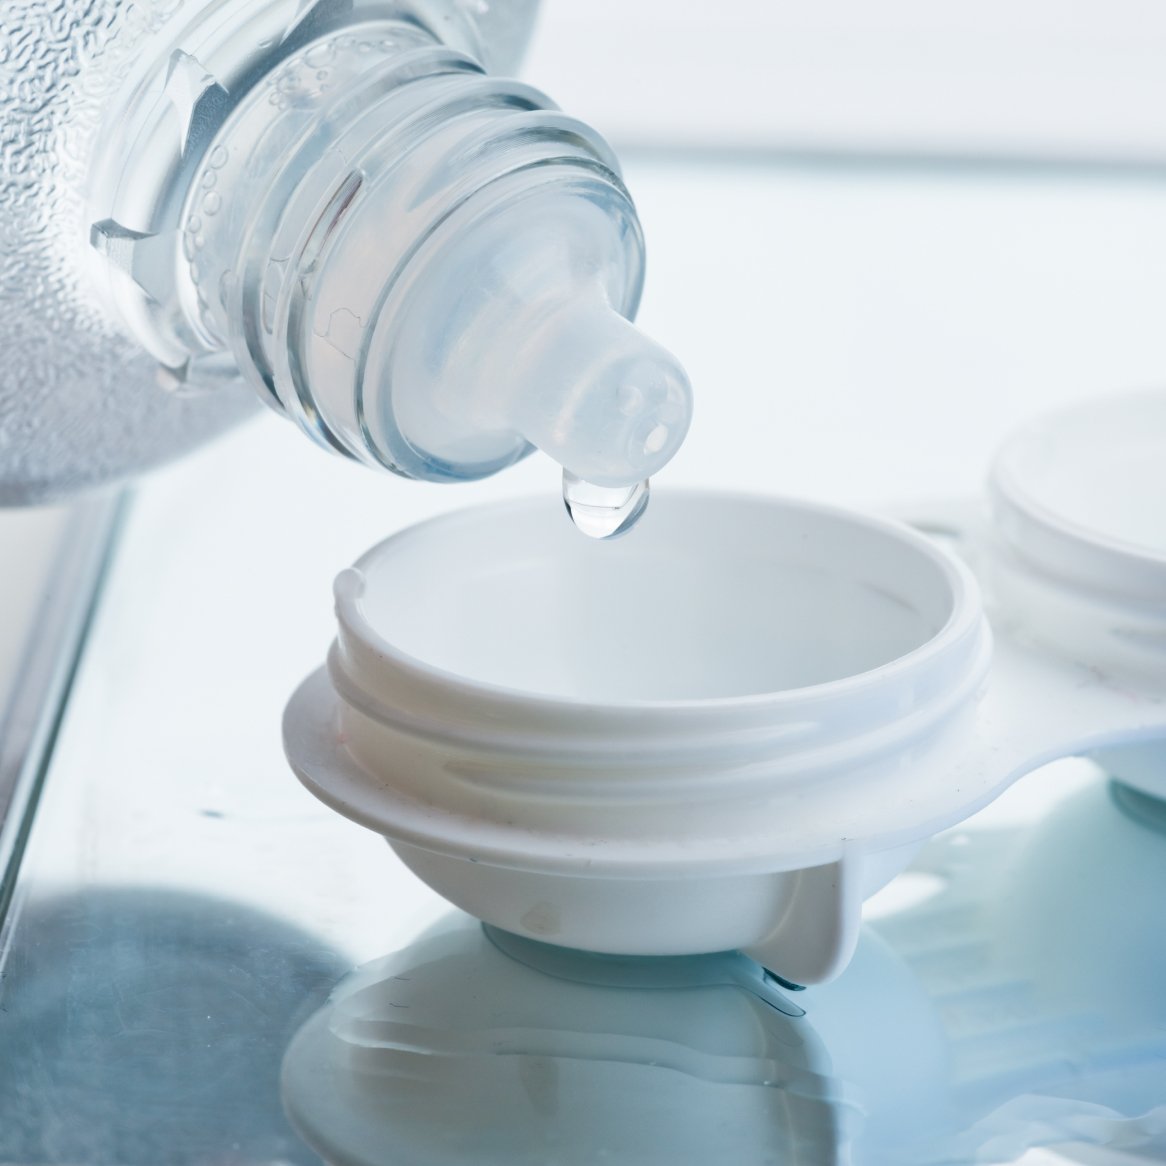 Photo of contact solution being poured into a contact storing case